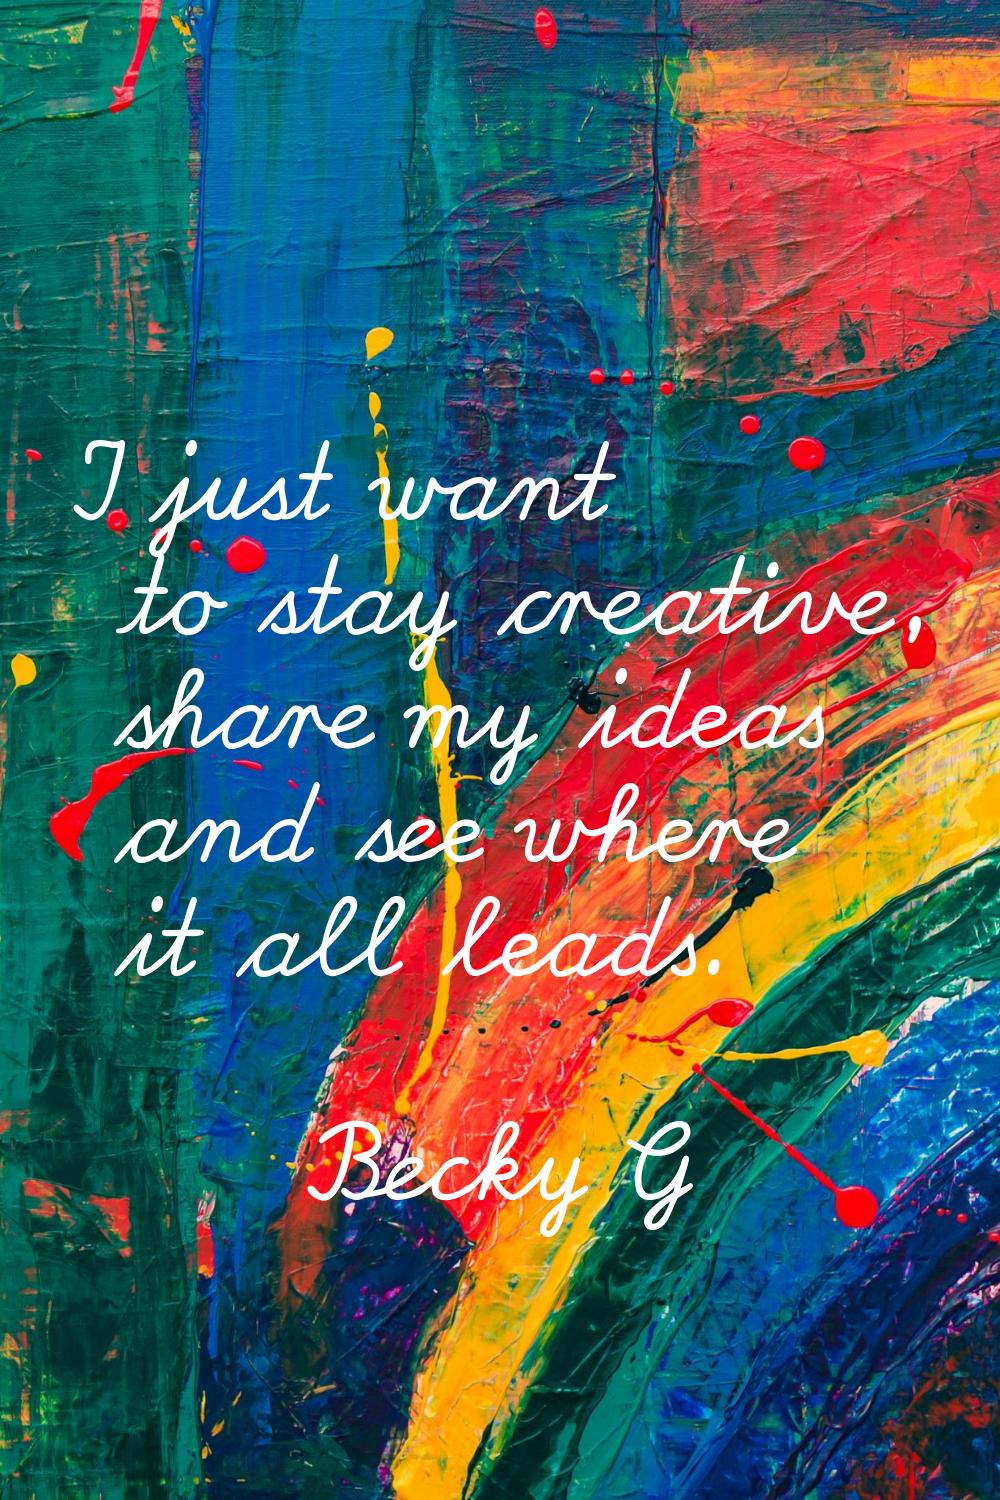 I just want to stay creative, share my ideas and see where it all leads.